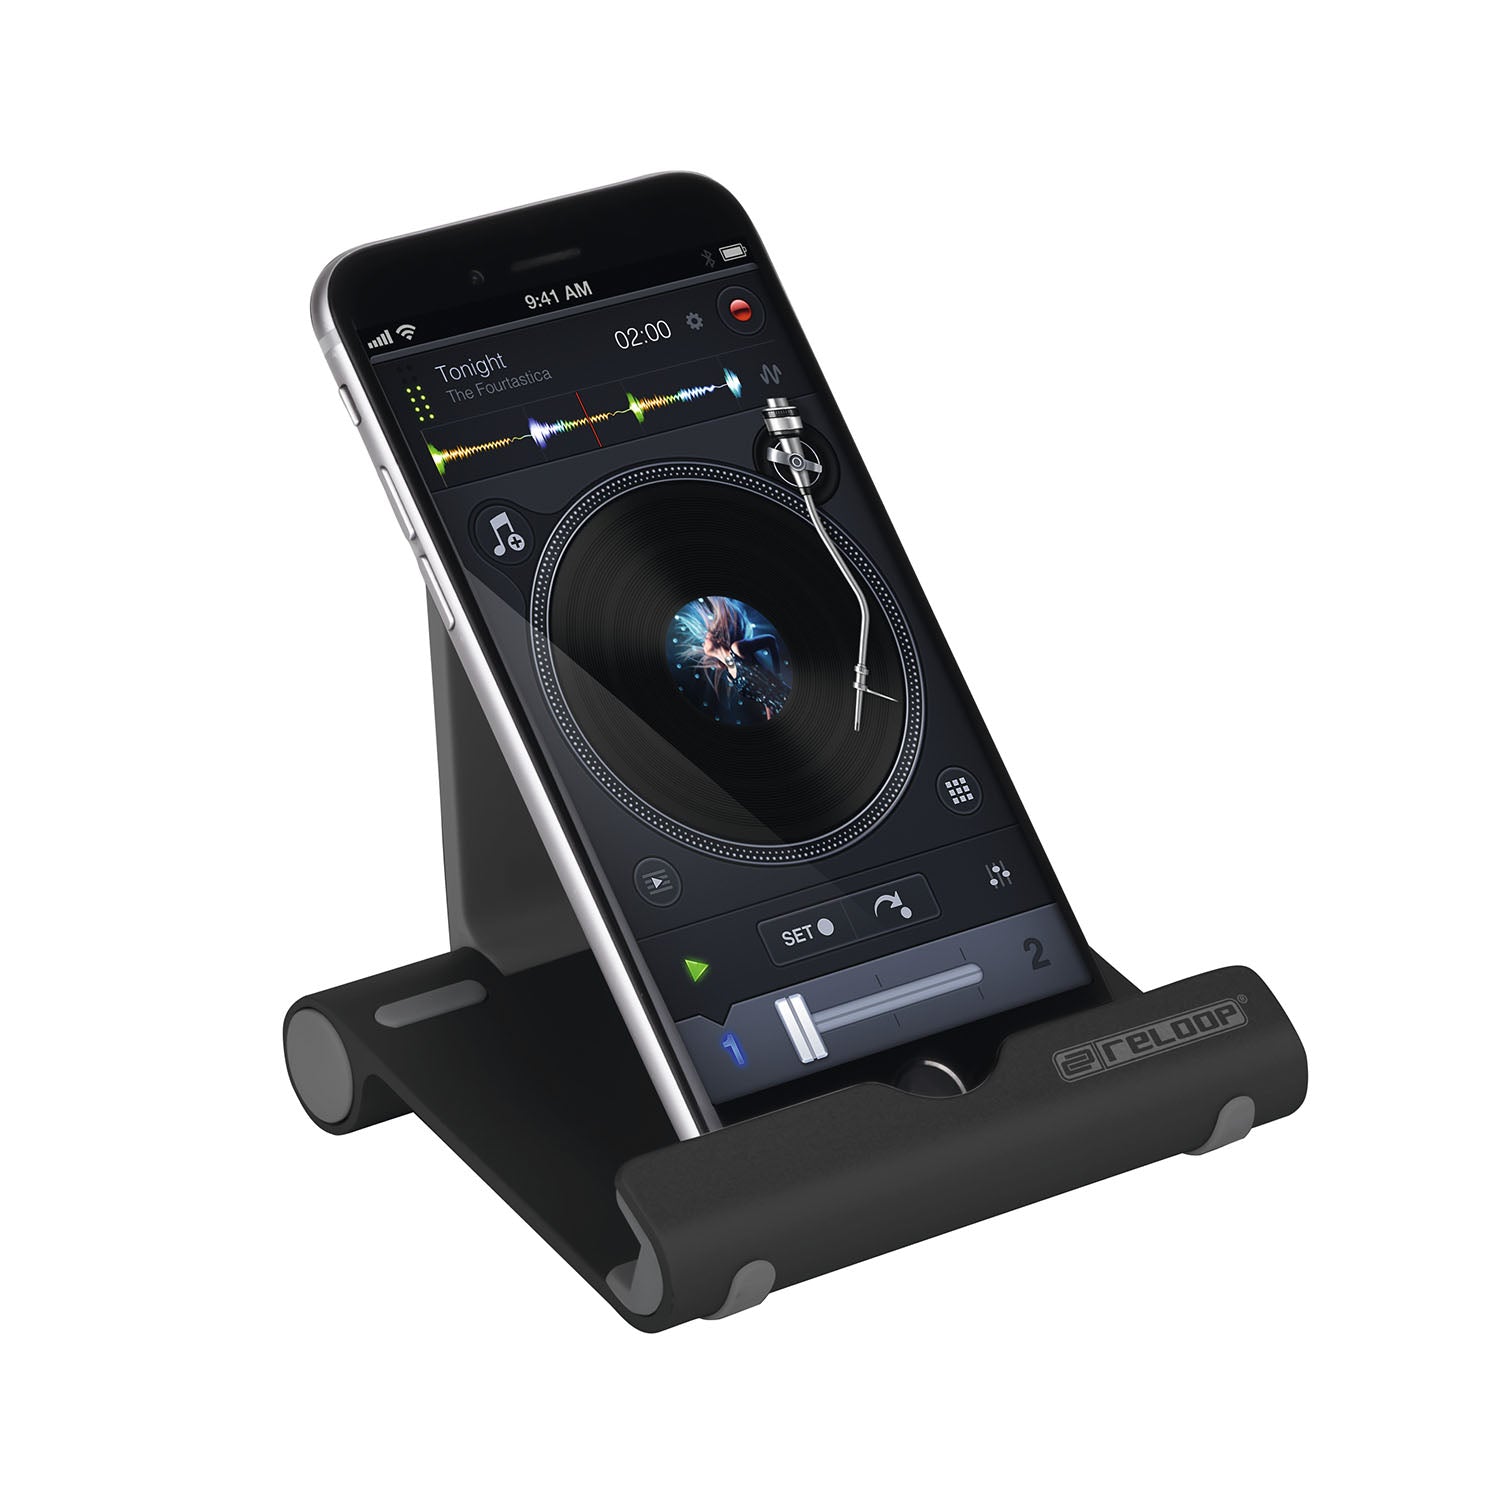 Reloop TABLET-STAND Tablet Stand For iPad/Tablet/iPhone/Android by Reloop